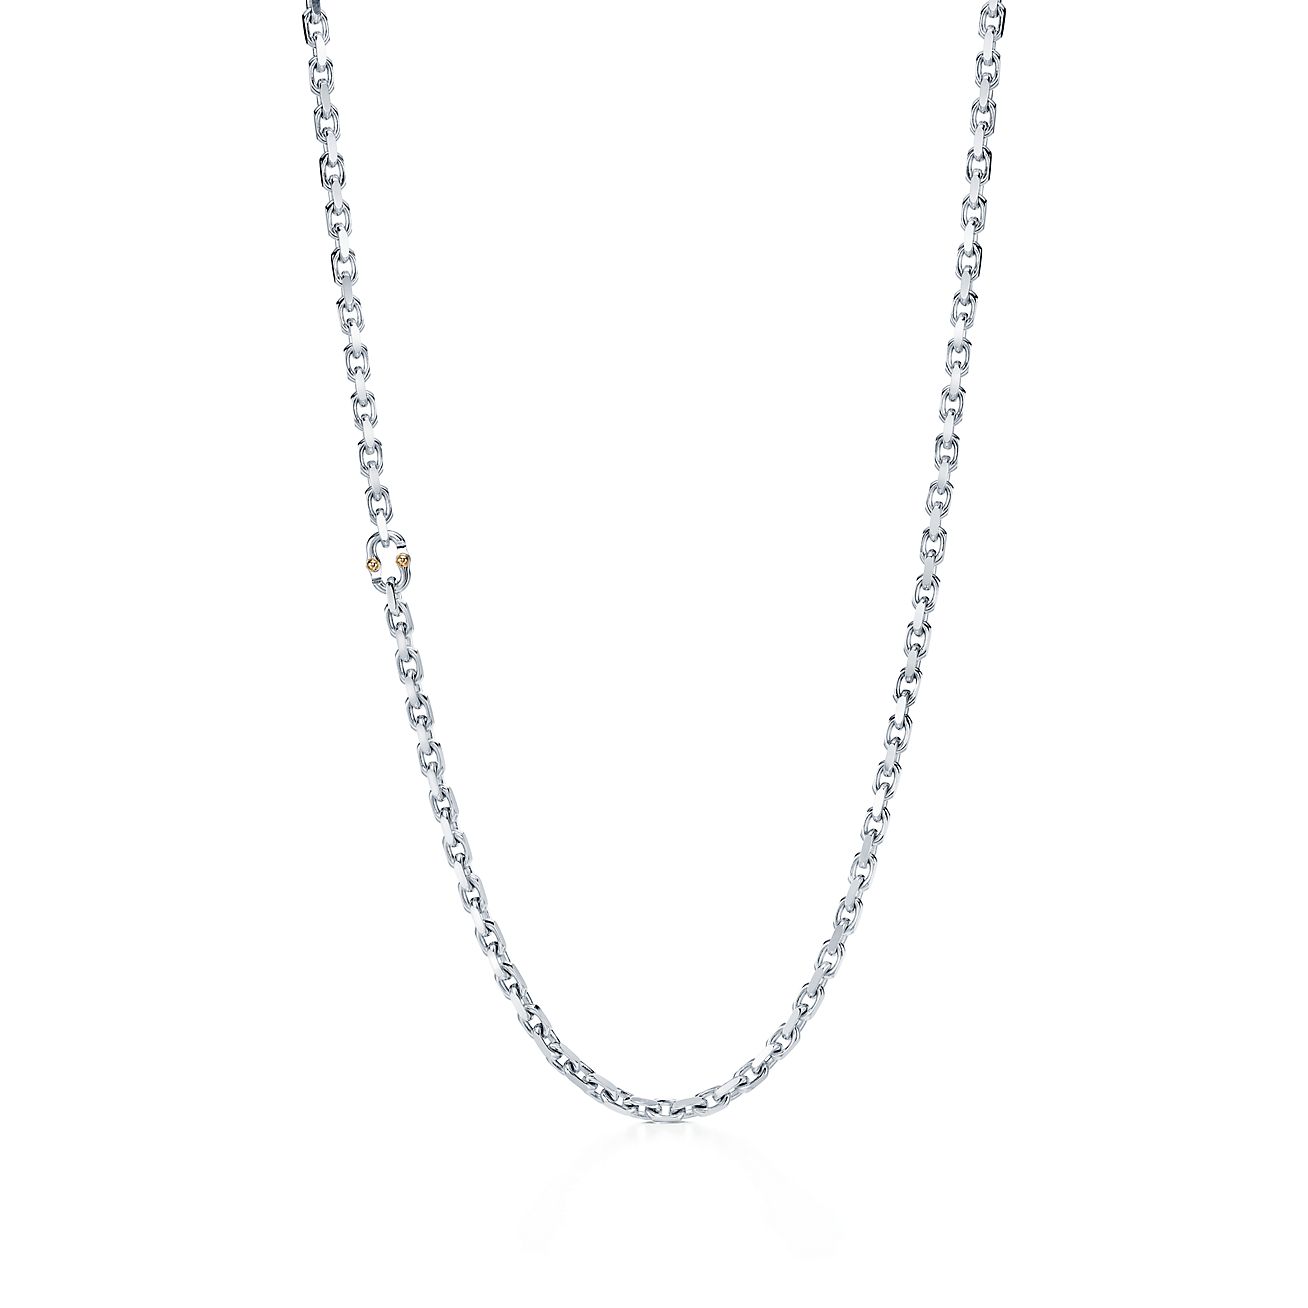 Tiffany 1837™Makers Chain Necklace in Sterling Silver and 18k Gold, 24"